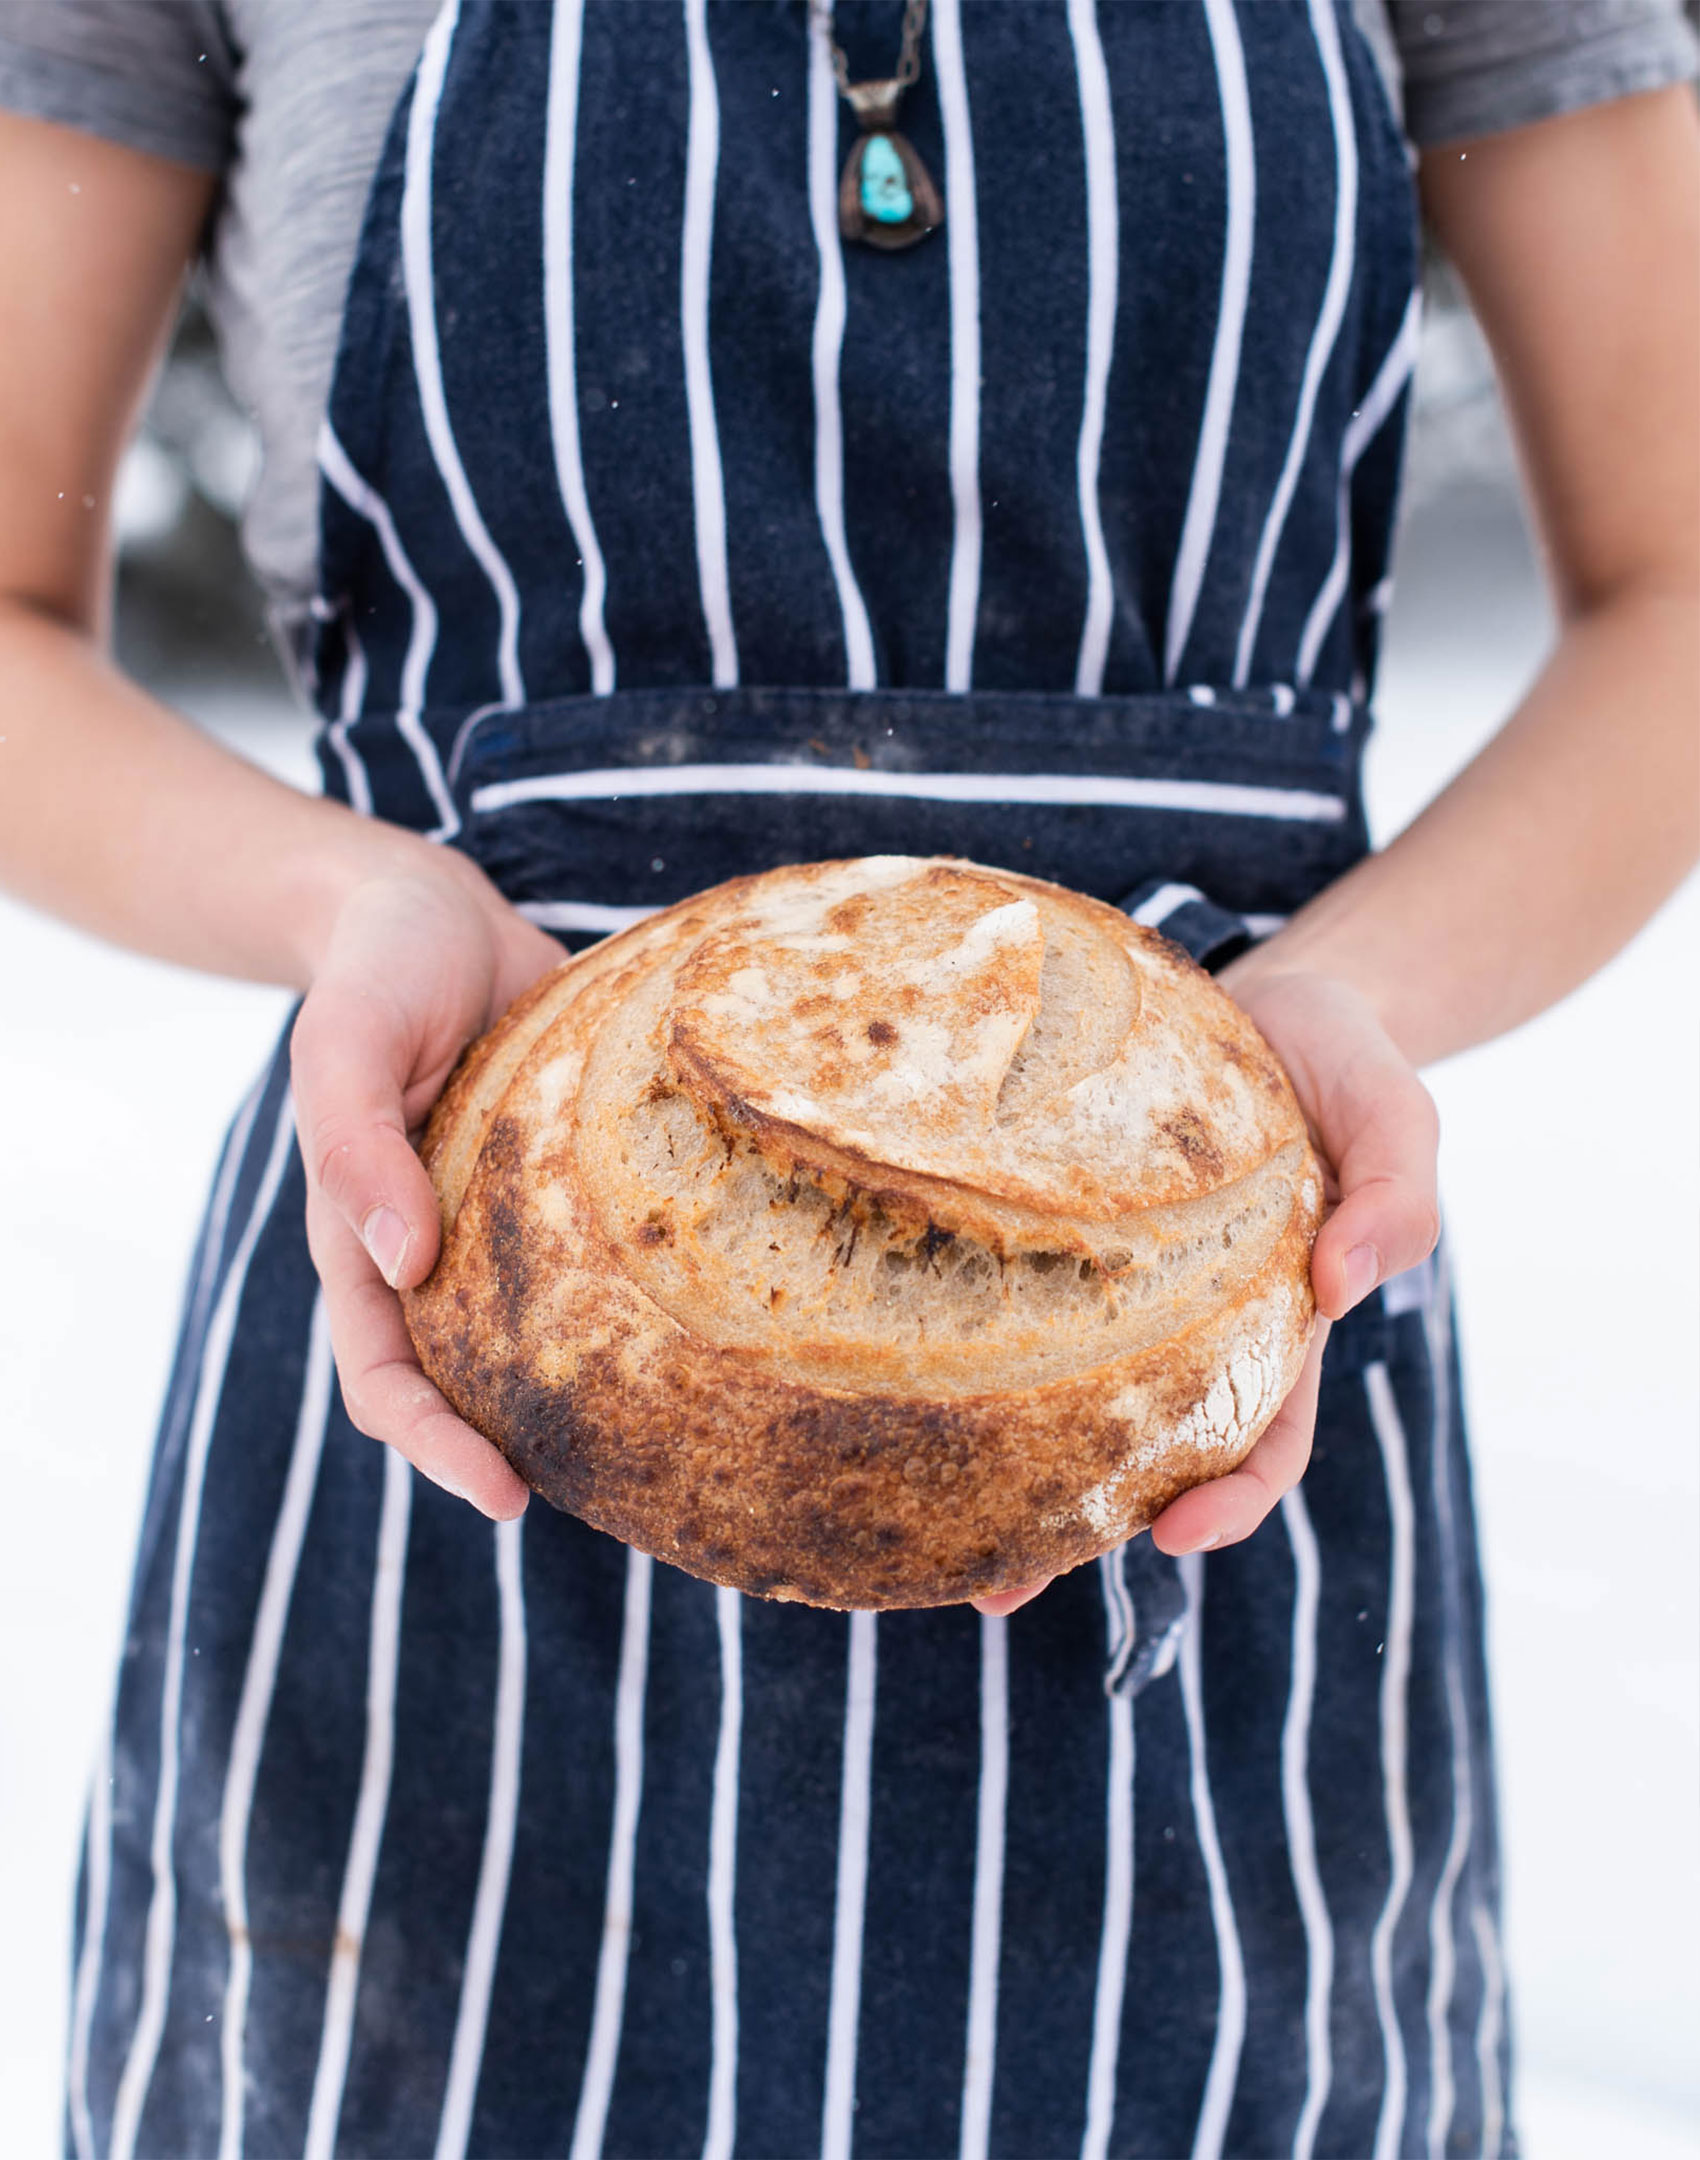 New-Thought-Wildly-Creative-Jackson-Hole-Social-Photography-In-Season-Bread-Loaf-halffullscreen